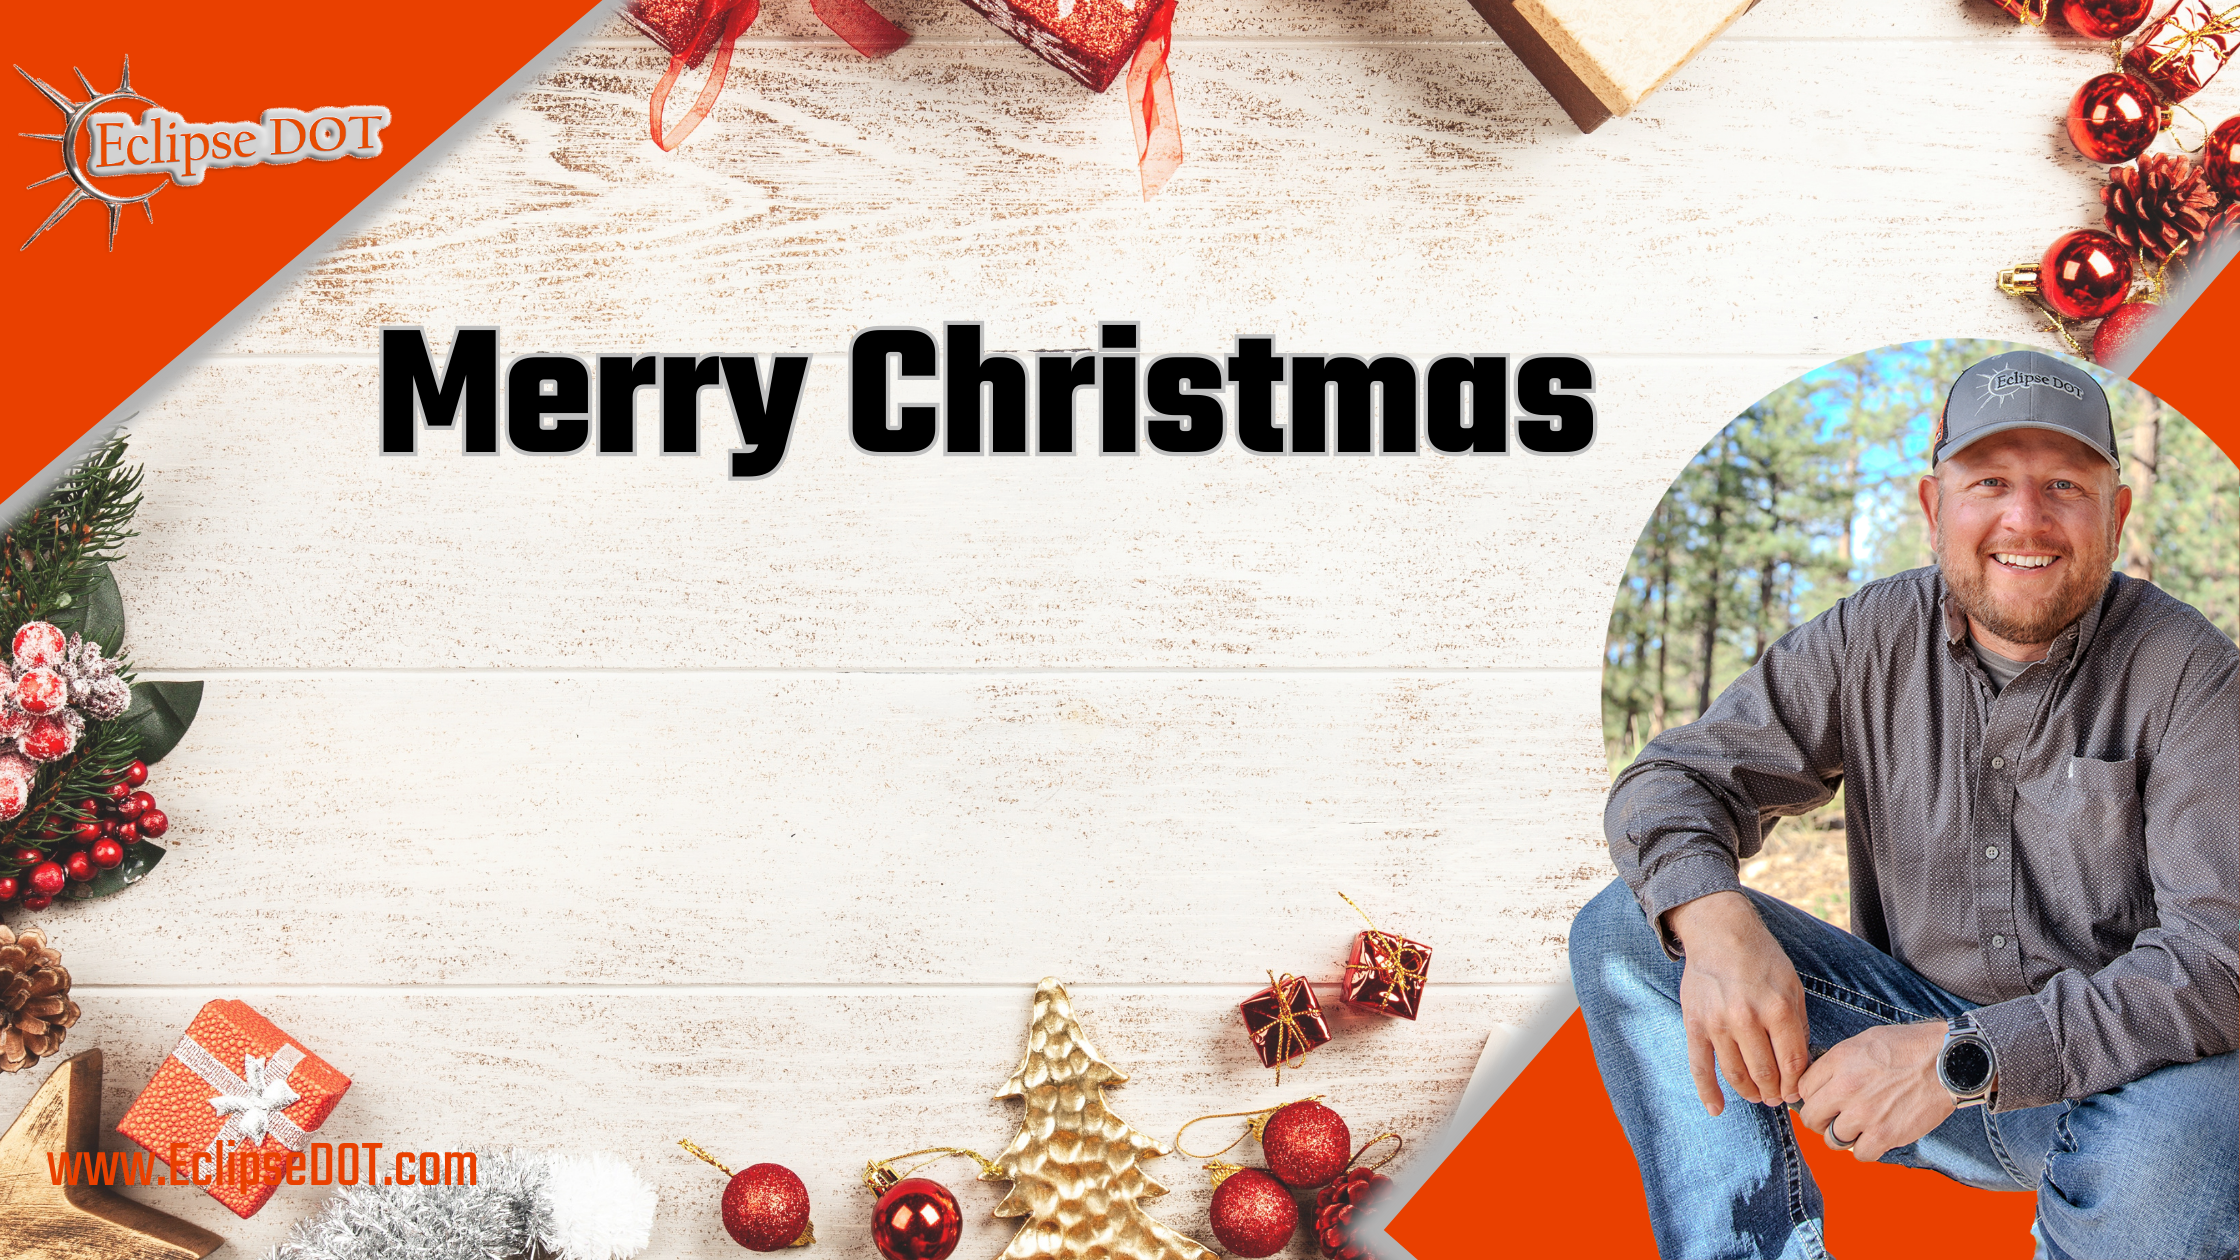 Merry Christmas greeting with festive decorations